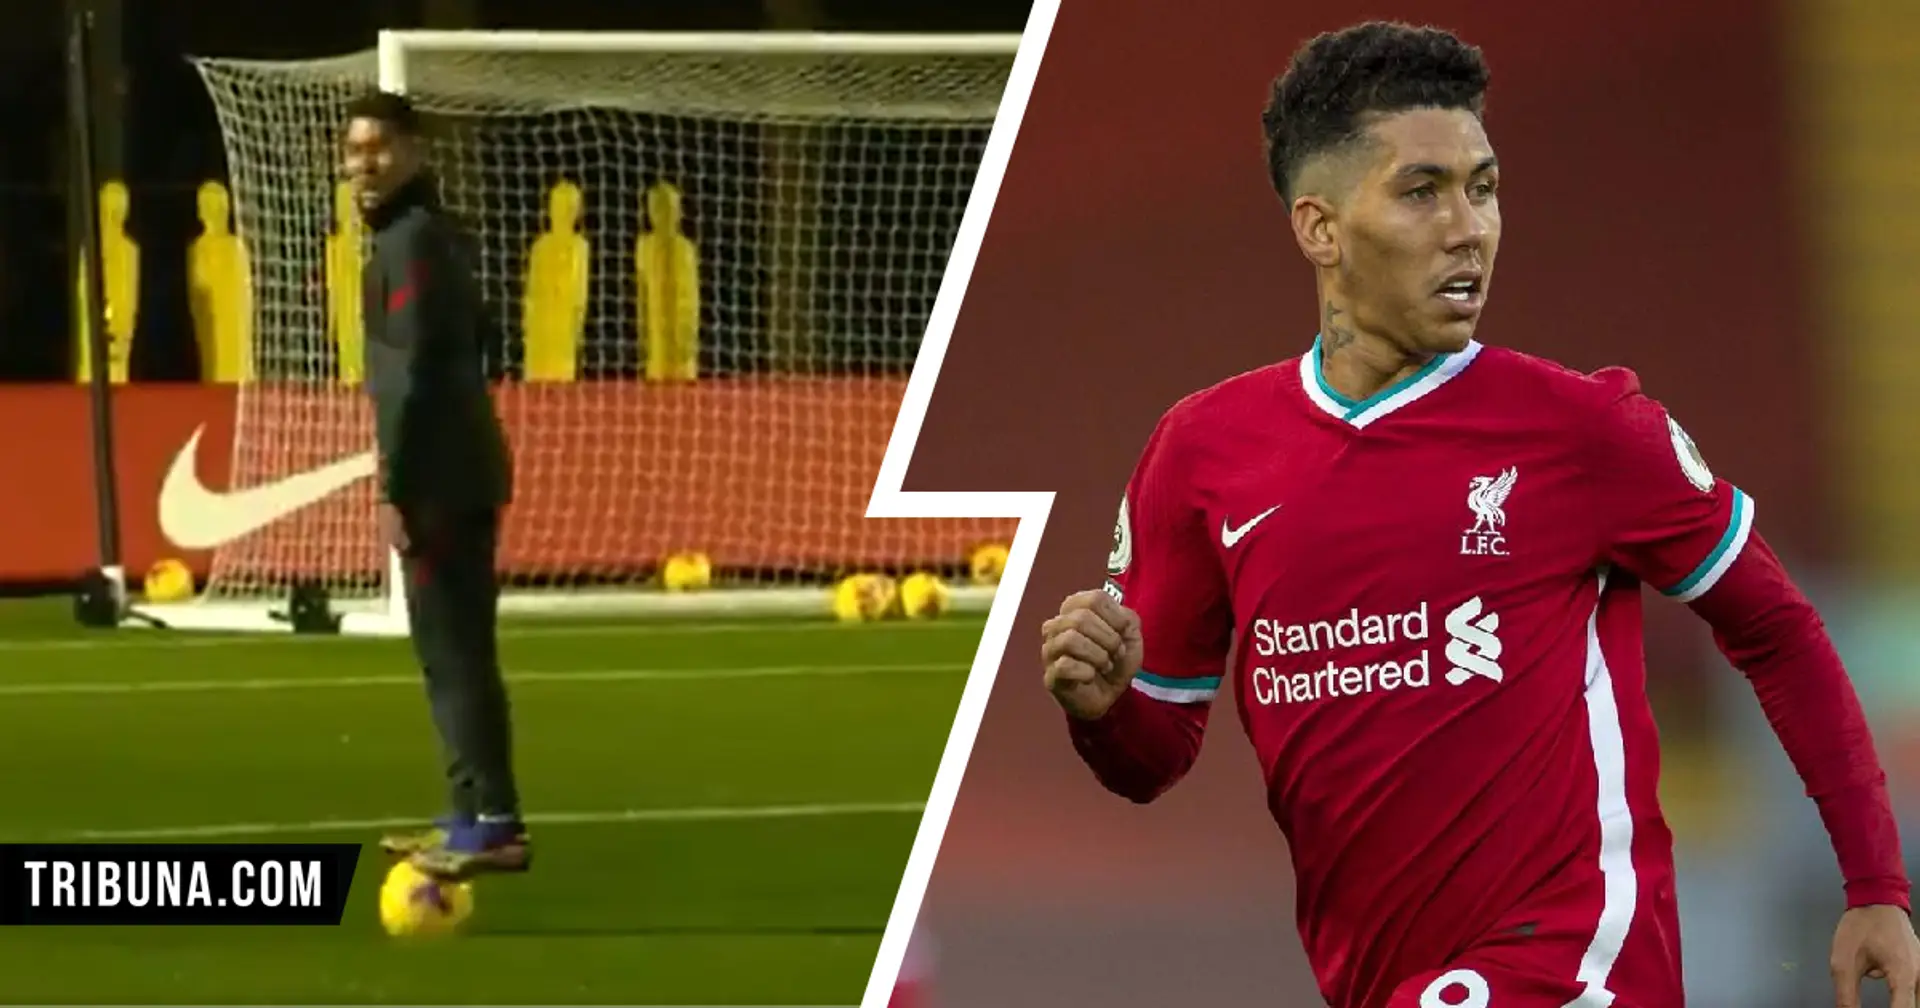 Bobby Firmino dazzles again with casual skill in training (video)